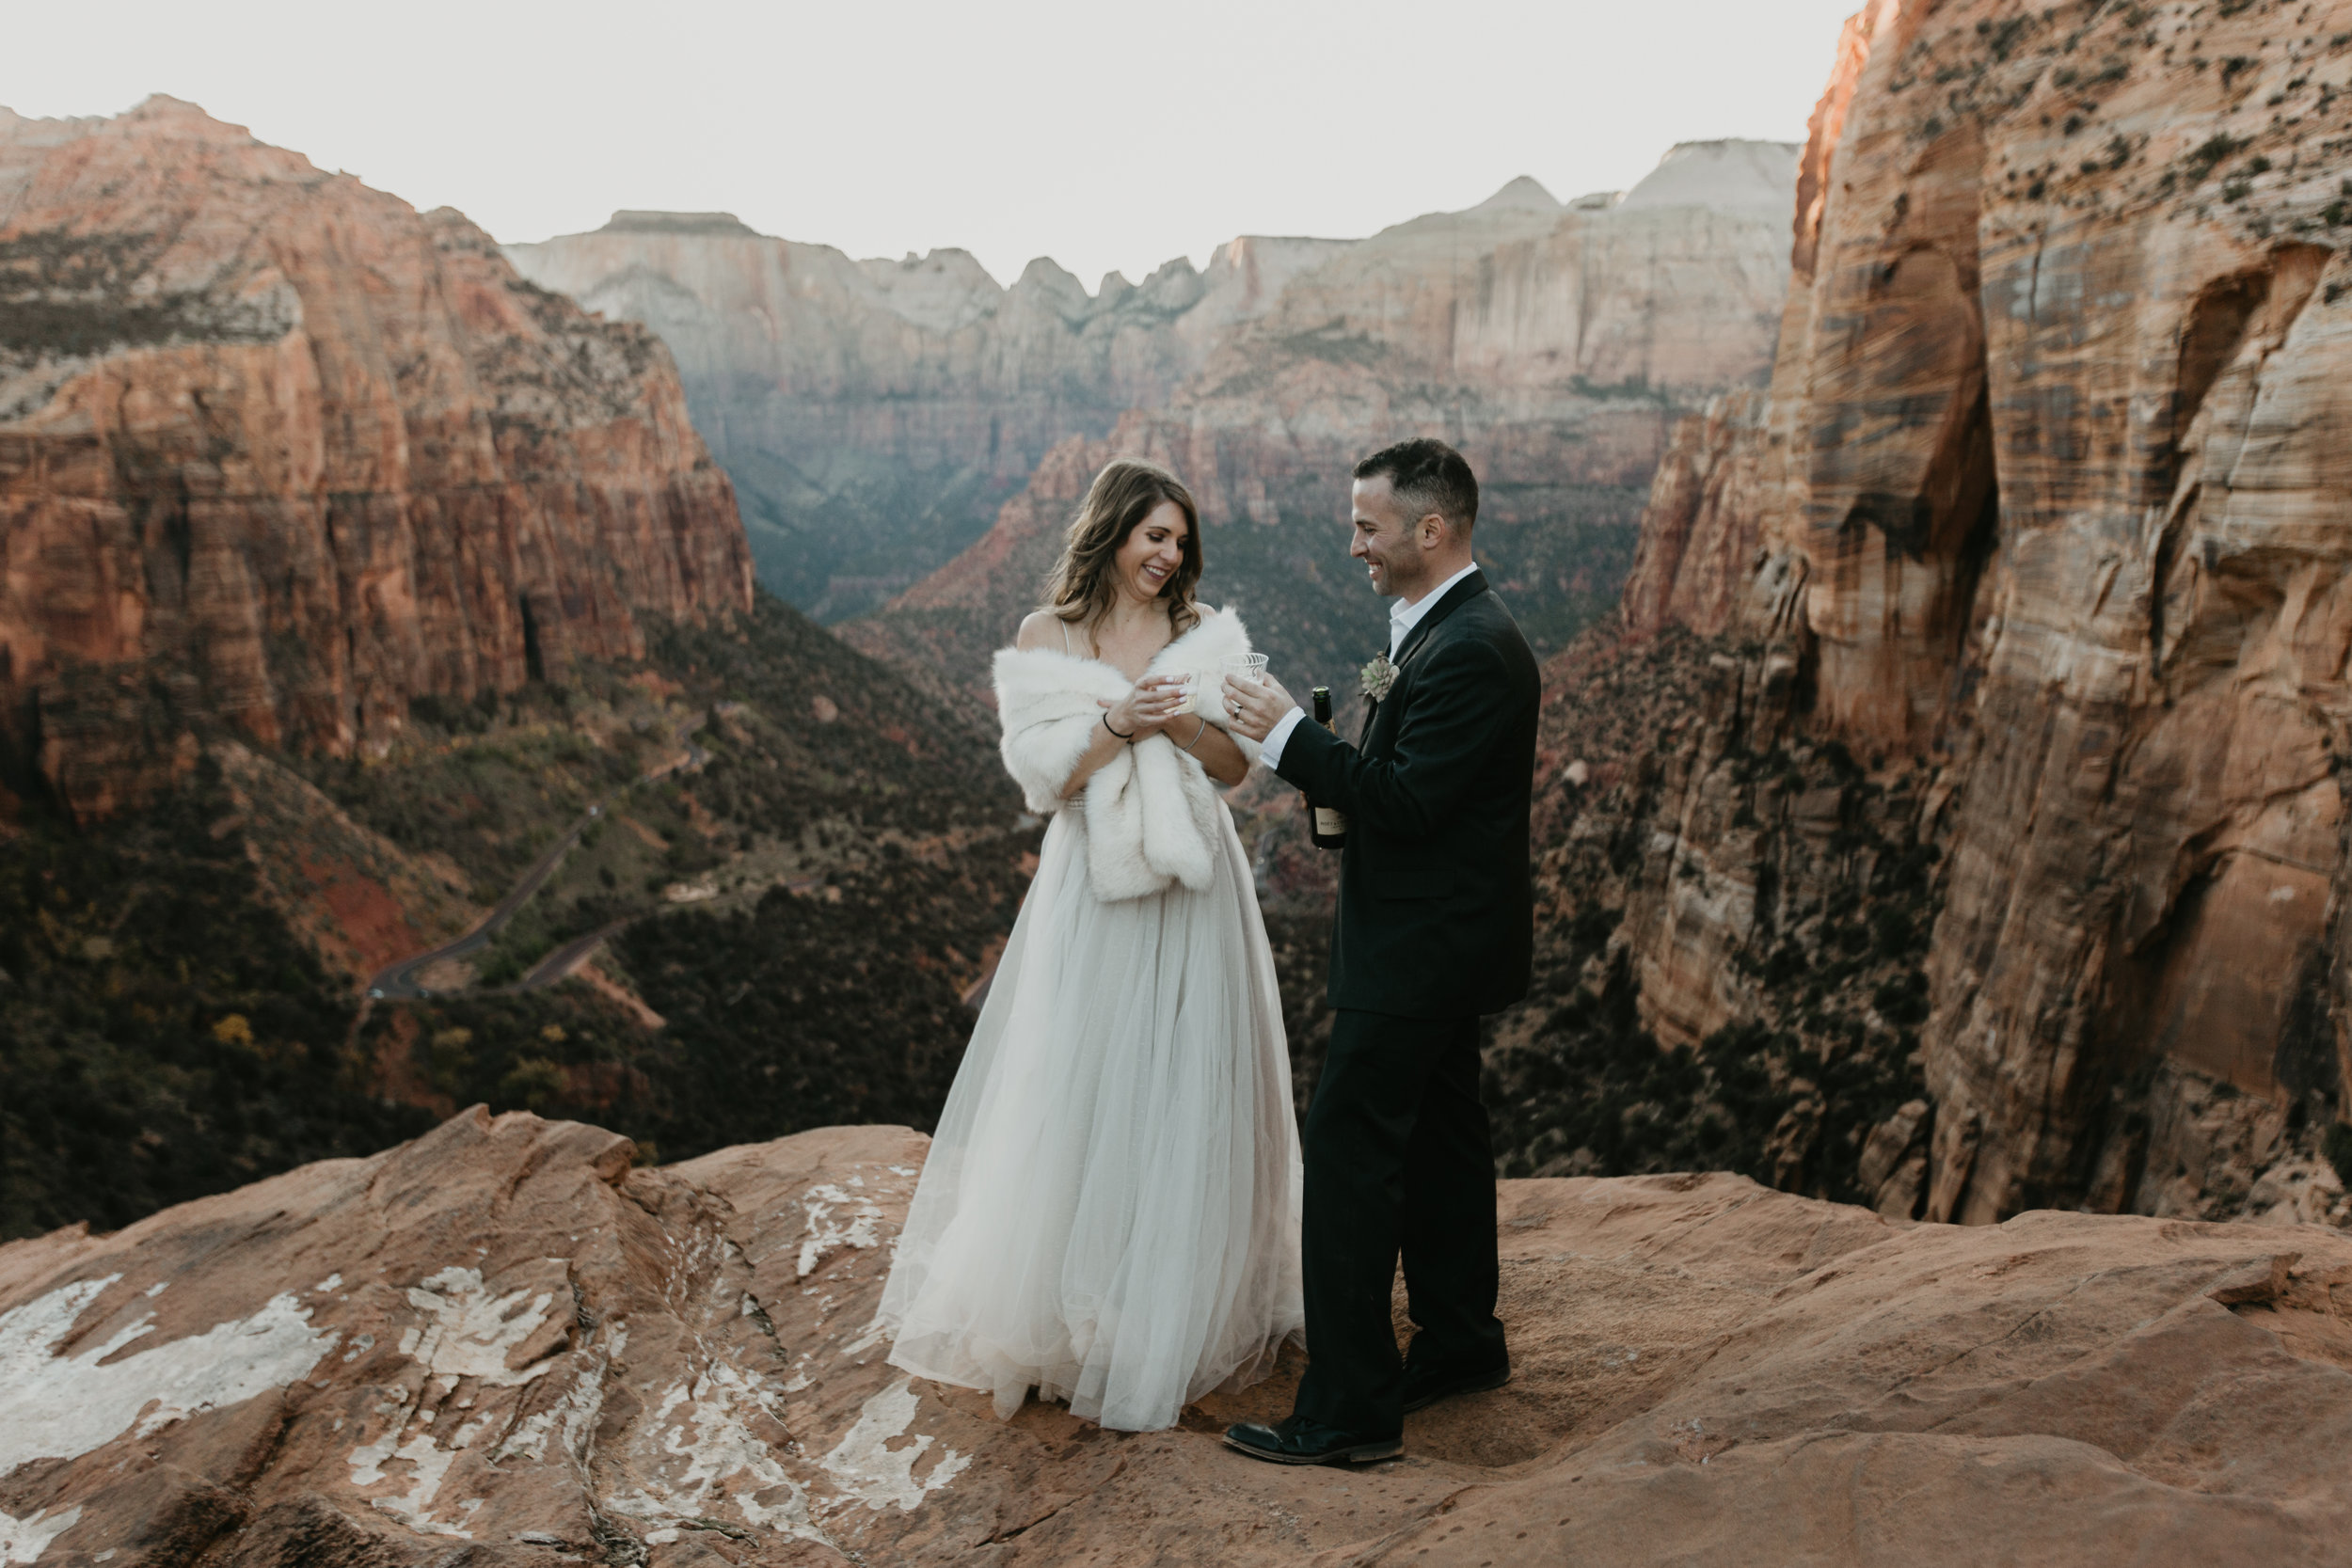 nicole-daacke-photography-zion-national-park-elopement-photographer-canyon-overlook-trail-elope-hiking-adventure-wedding-photos-fall-utah-red-rock-canyon-stgeorge-eloping-photographer-65.jpg